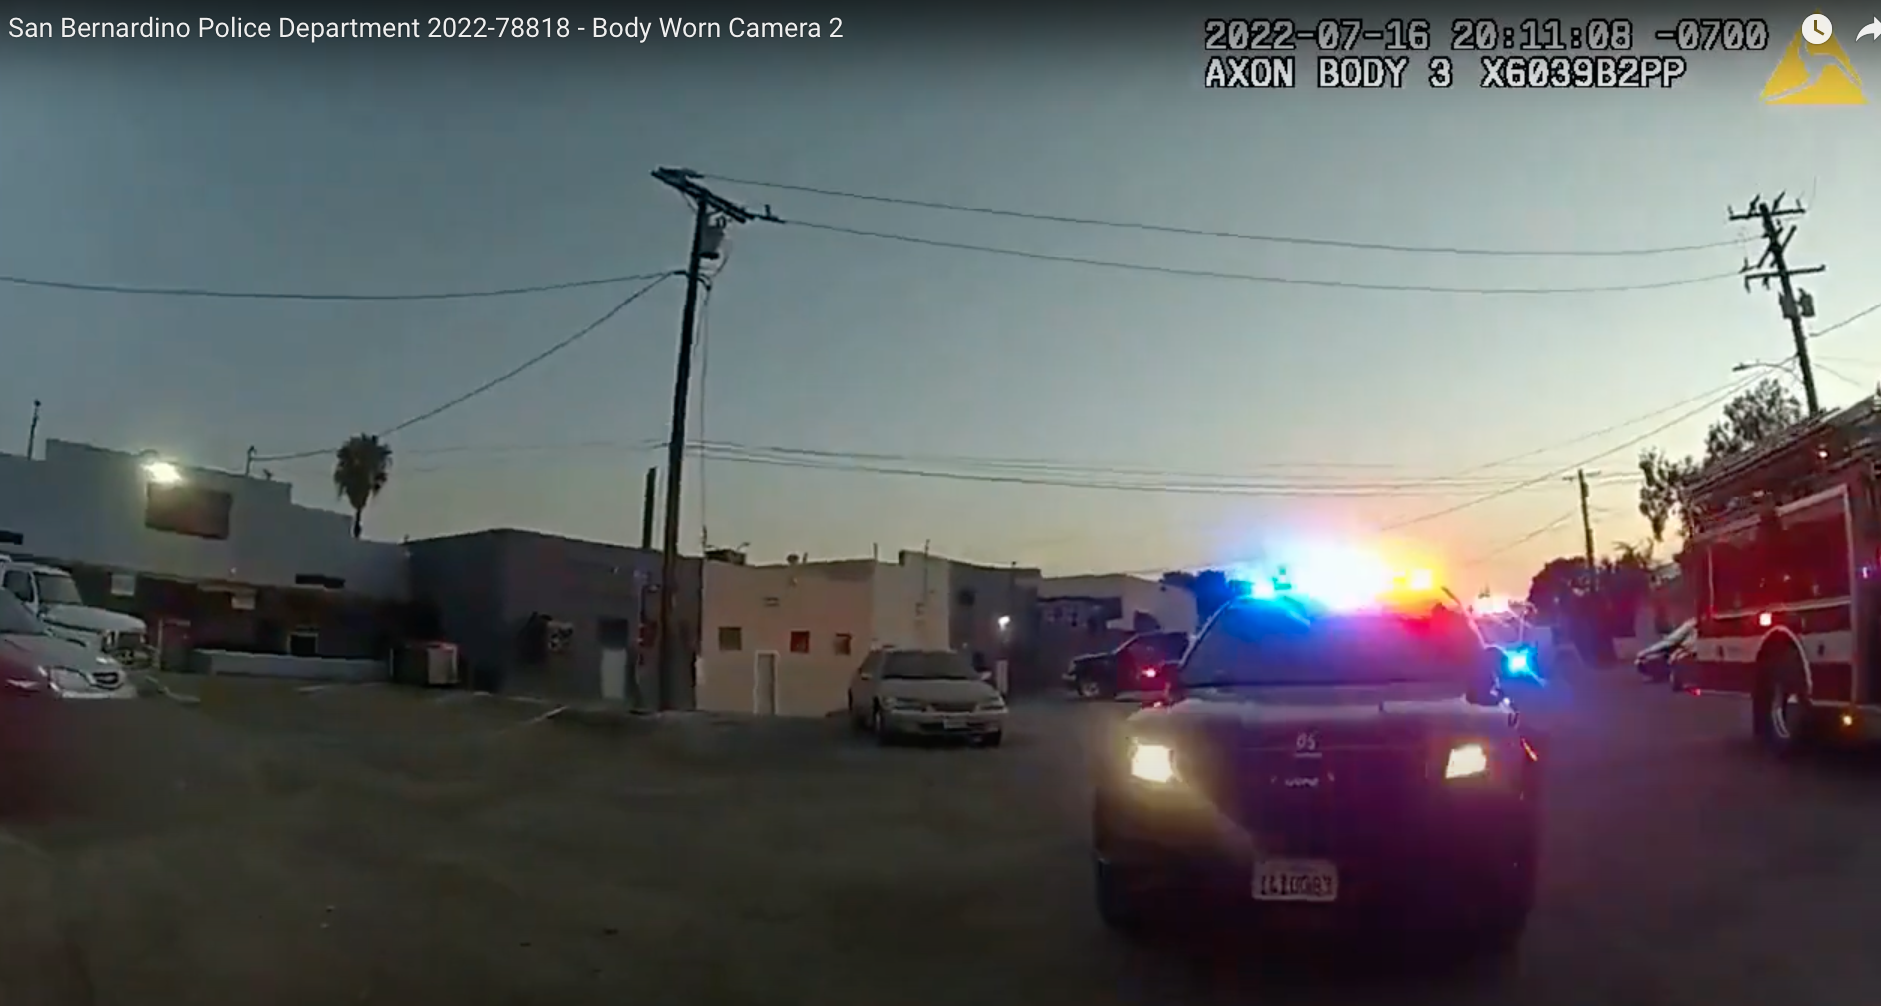 A still shot from police dash cam footage shows a police vehicle with red and blue lights flashing as it answers a call in a neighborhood in Southern California.